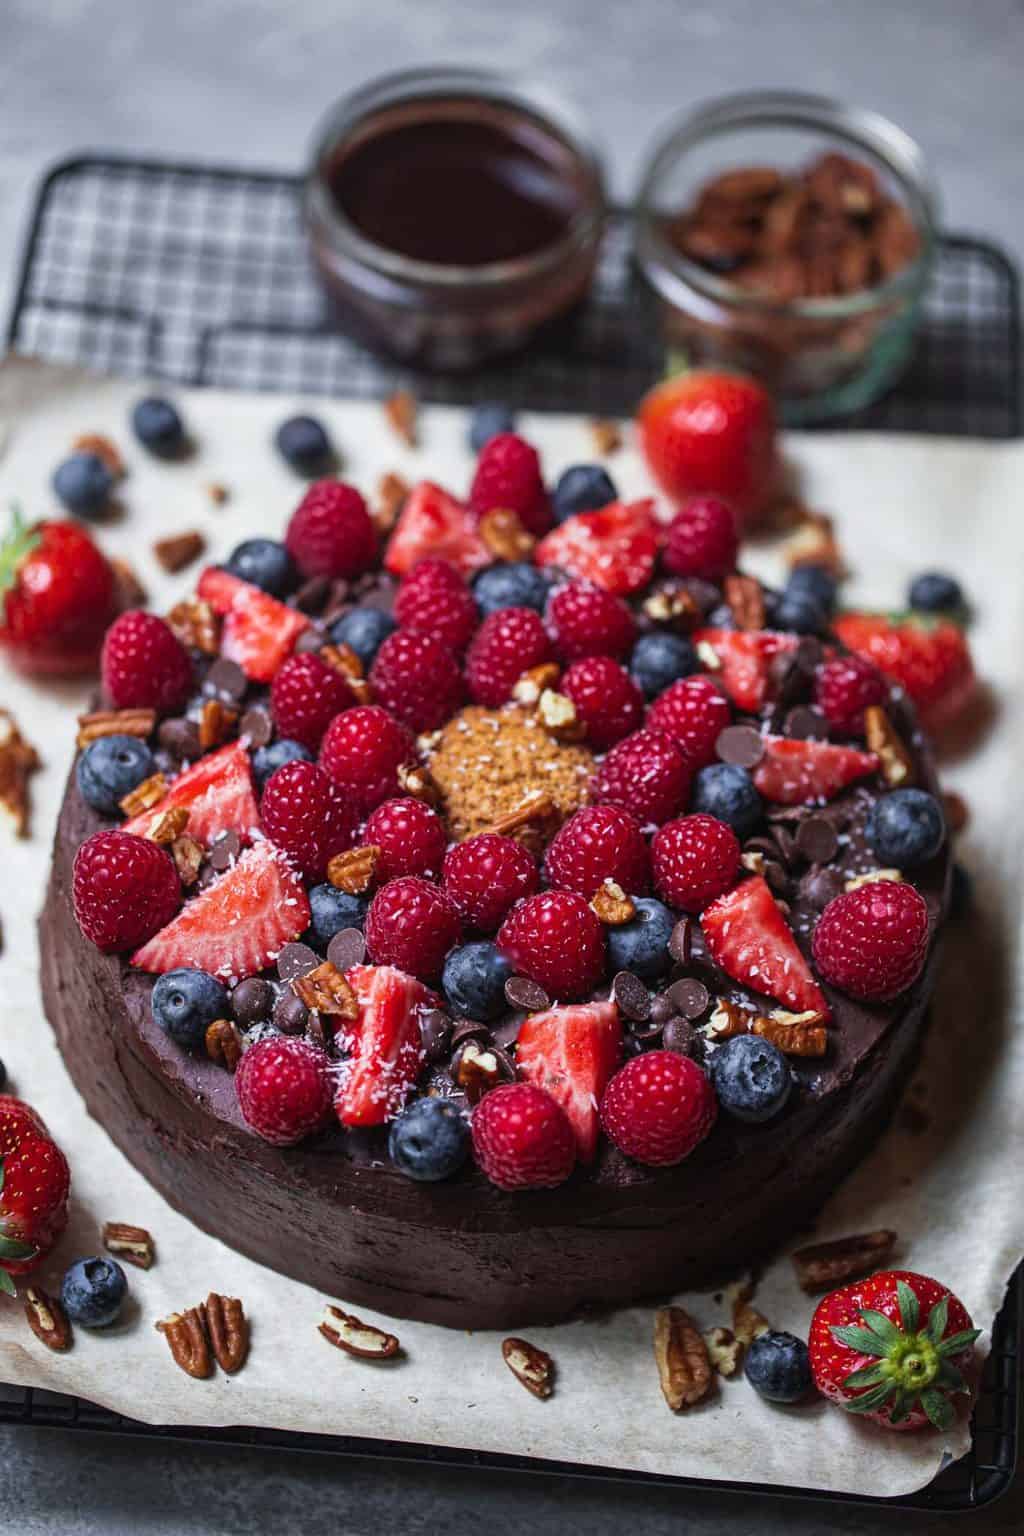 vegan chocolate cake on parchment paper, topped with berries